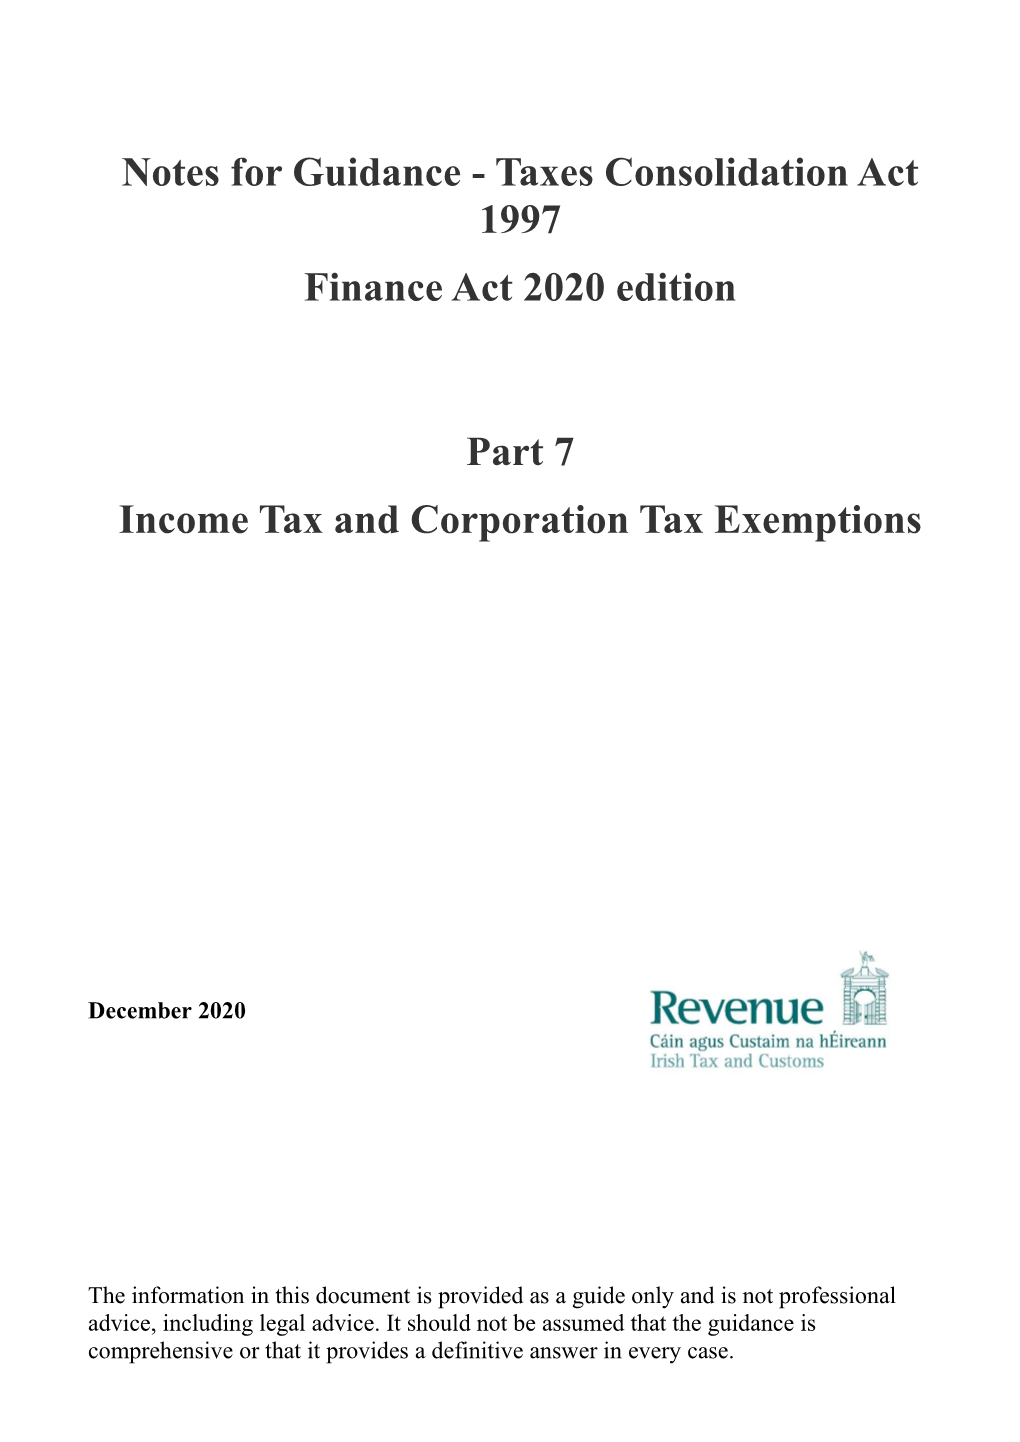 Notes for Guidance - Taxes Consolidation Act 1997 Finance Act 2020 Edition